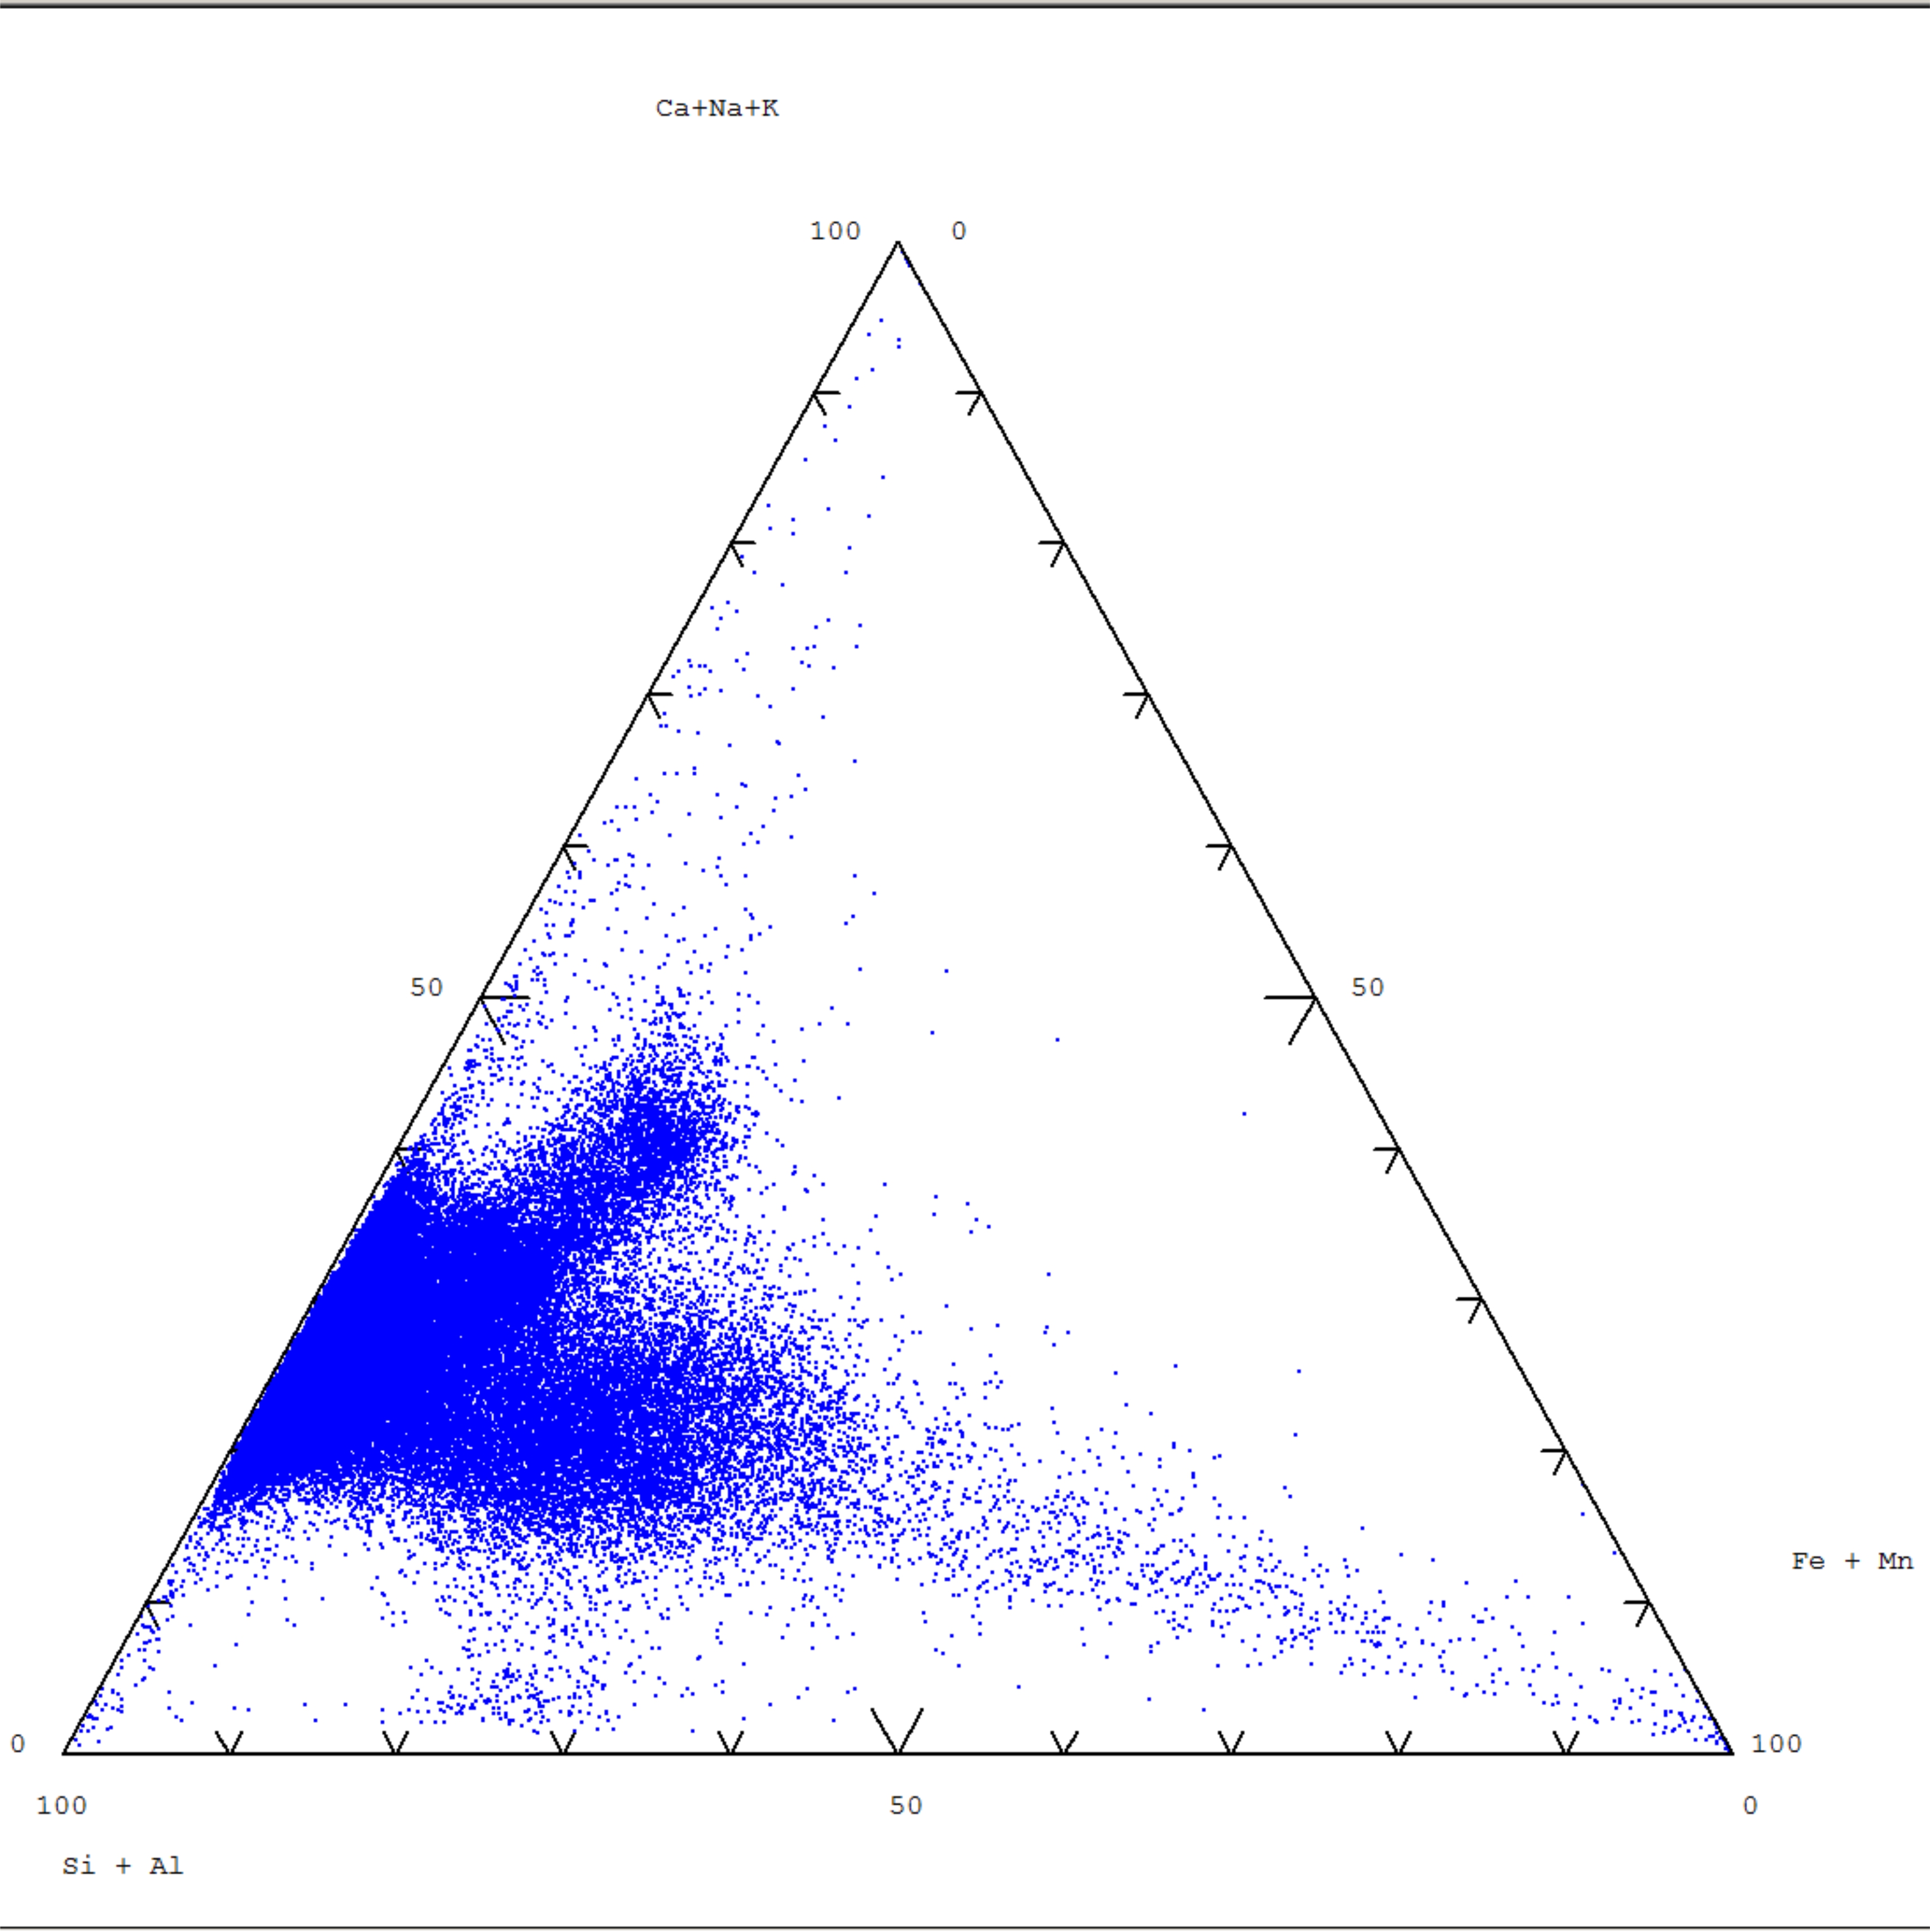 Phase mapping based on Ternary Diagram